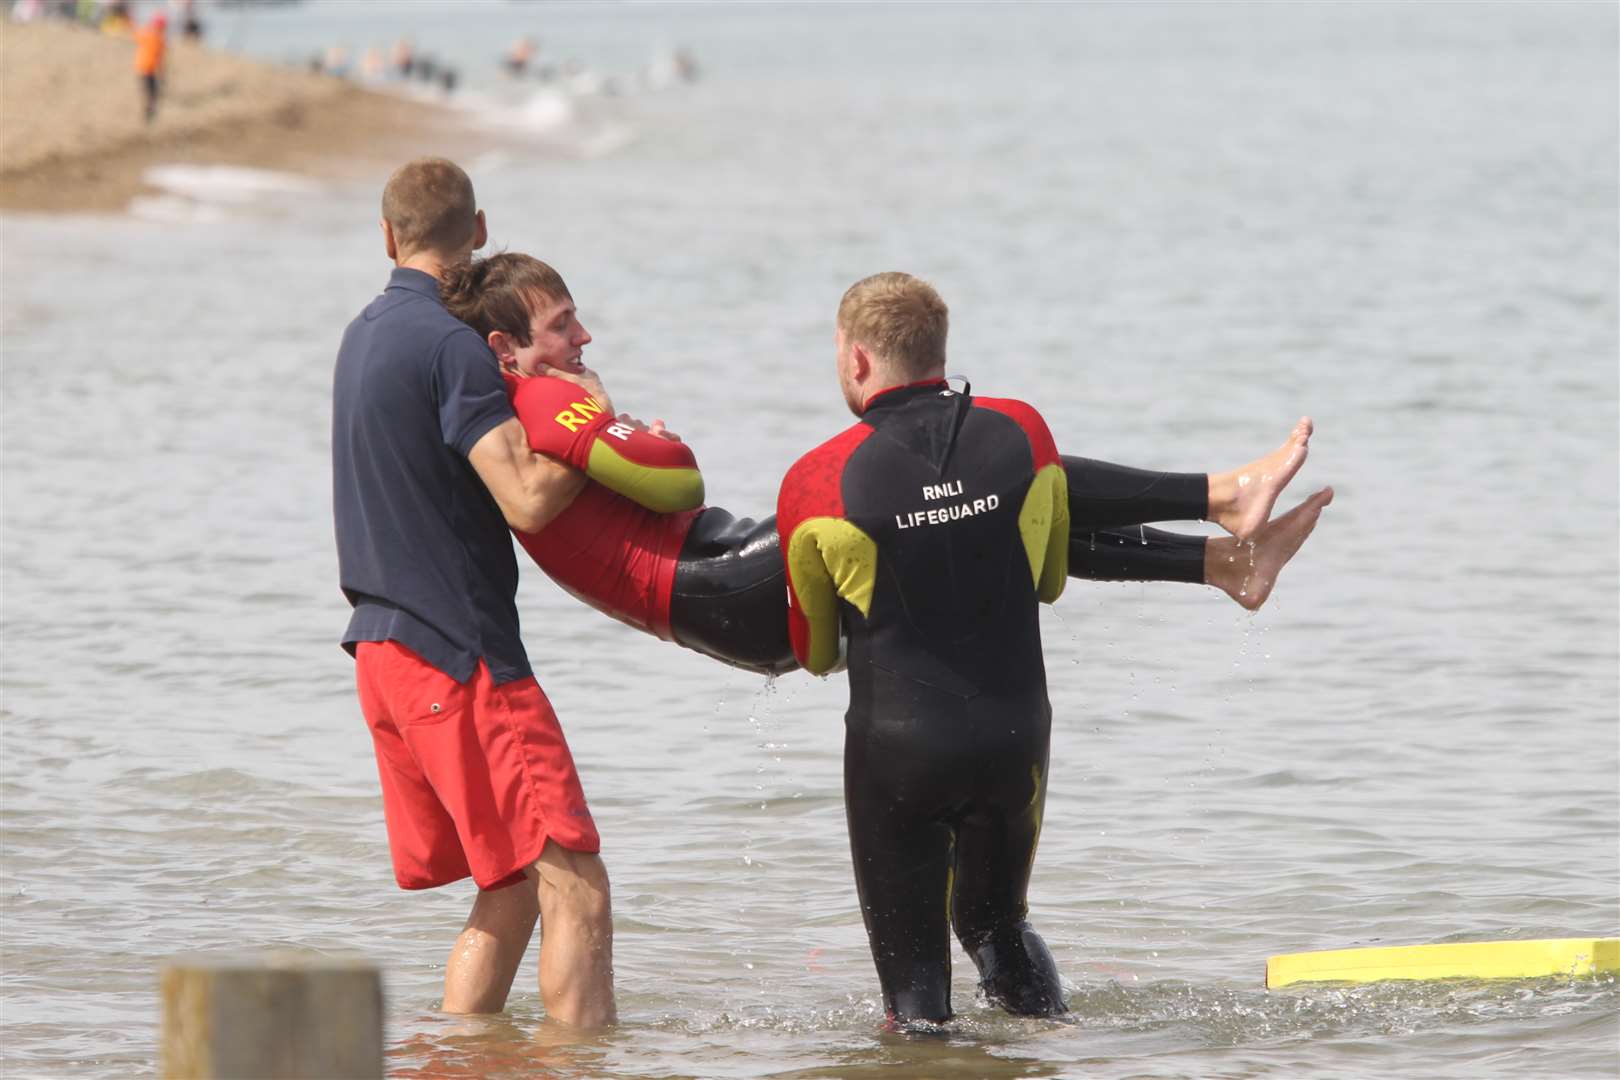 Lifeguards carry out a rescue demonstration at Sheerness bringing a 'victim' out of the water. Picture: John Westhrop